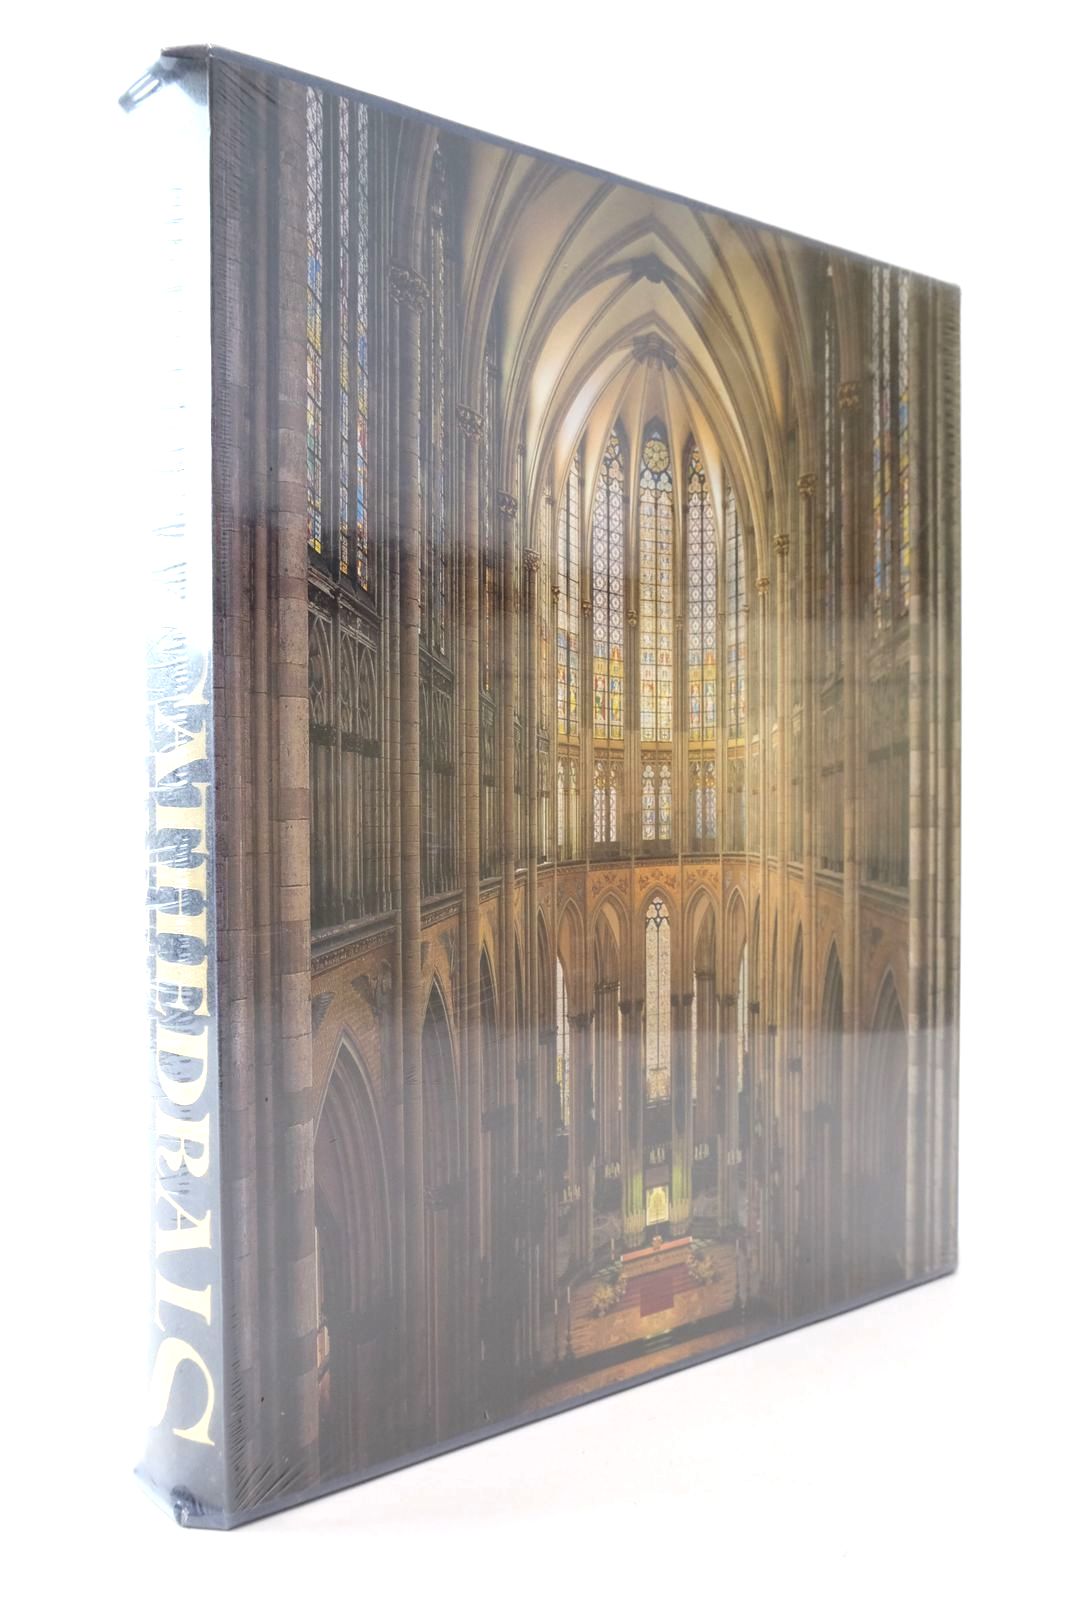 Photo of GREAT CATHEDRALS OF THE MIDDLE AGES written by Schutz, Bernhard published by Abrams (STOCK CODE: 2136837)  for sale by Stella & Rose's Books